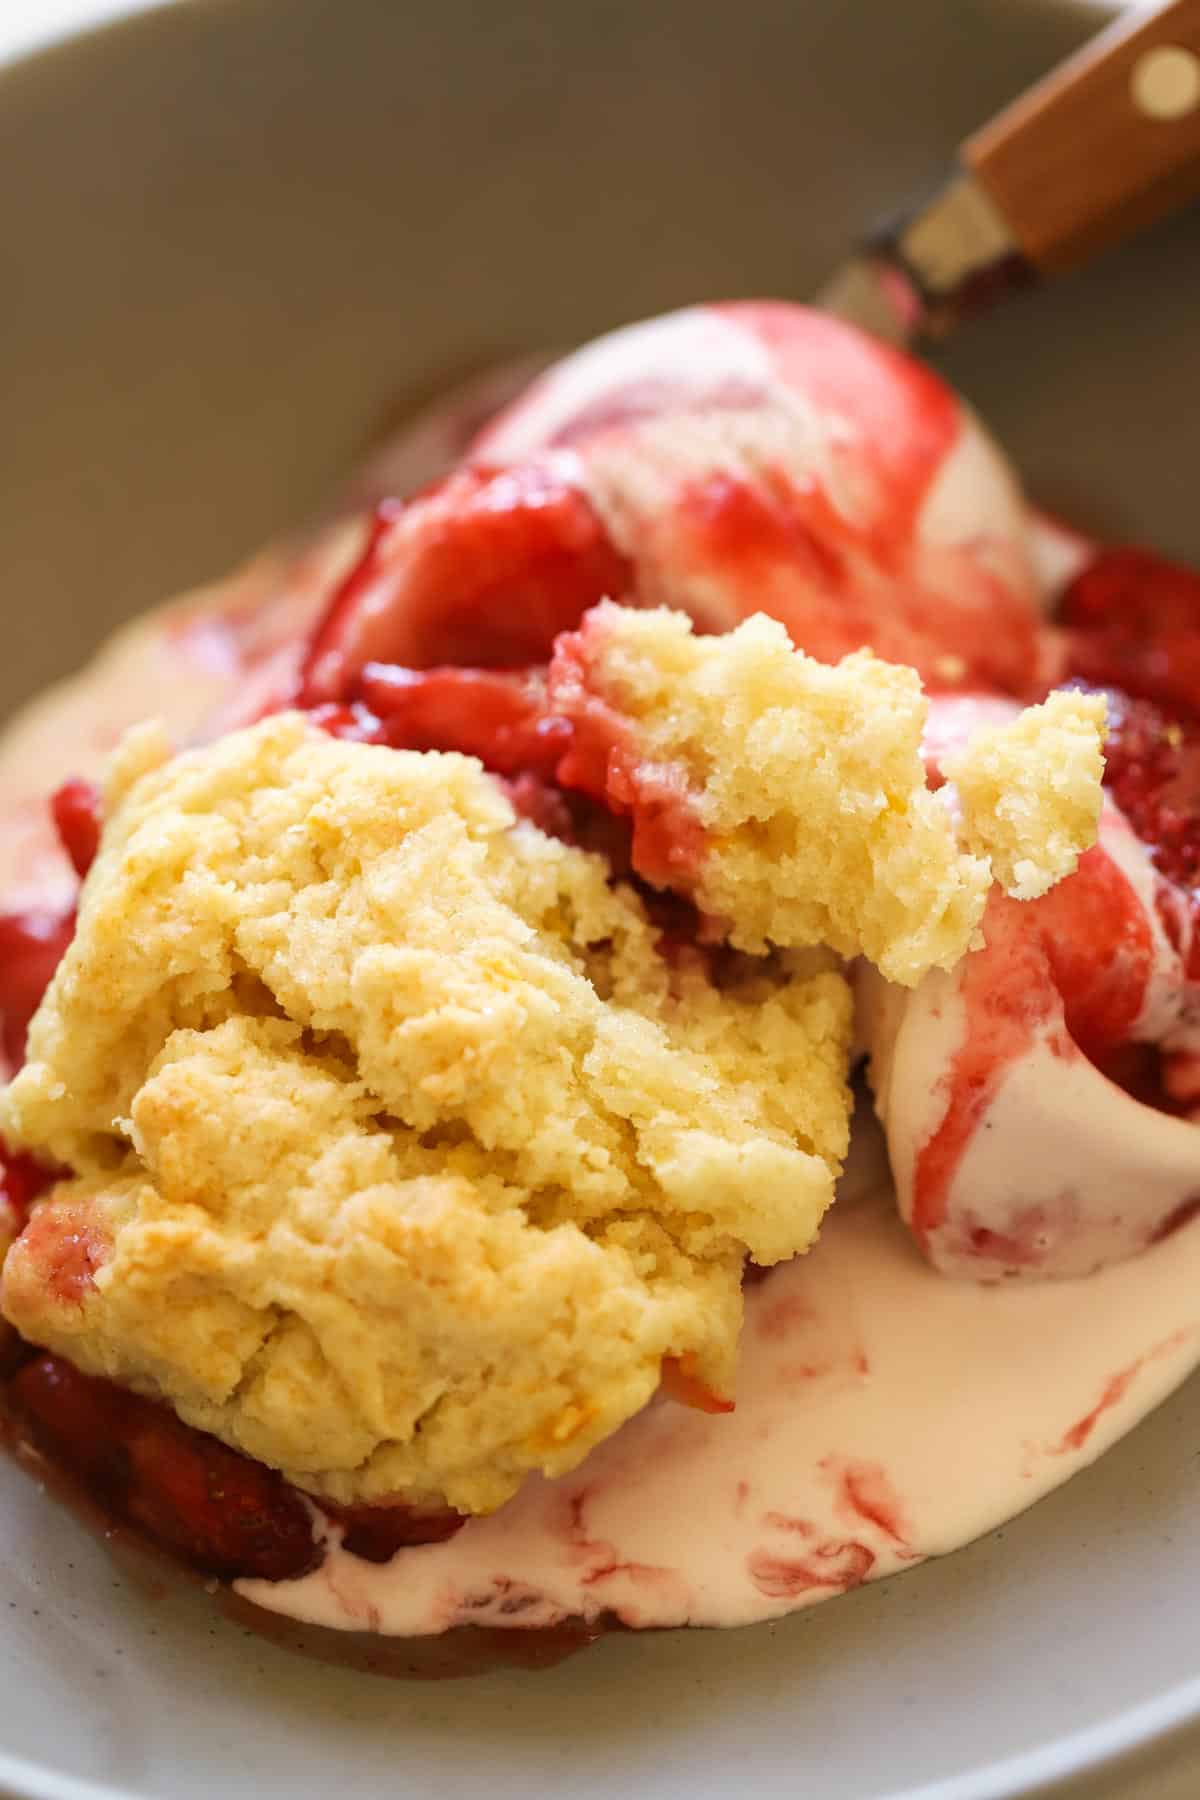 a bowl of strawberry cobbler with a flakey drop biscuit